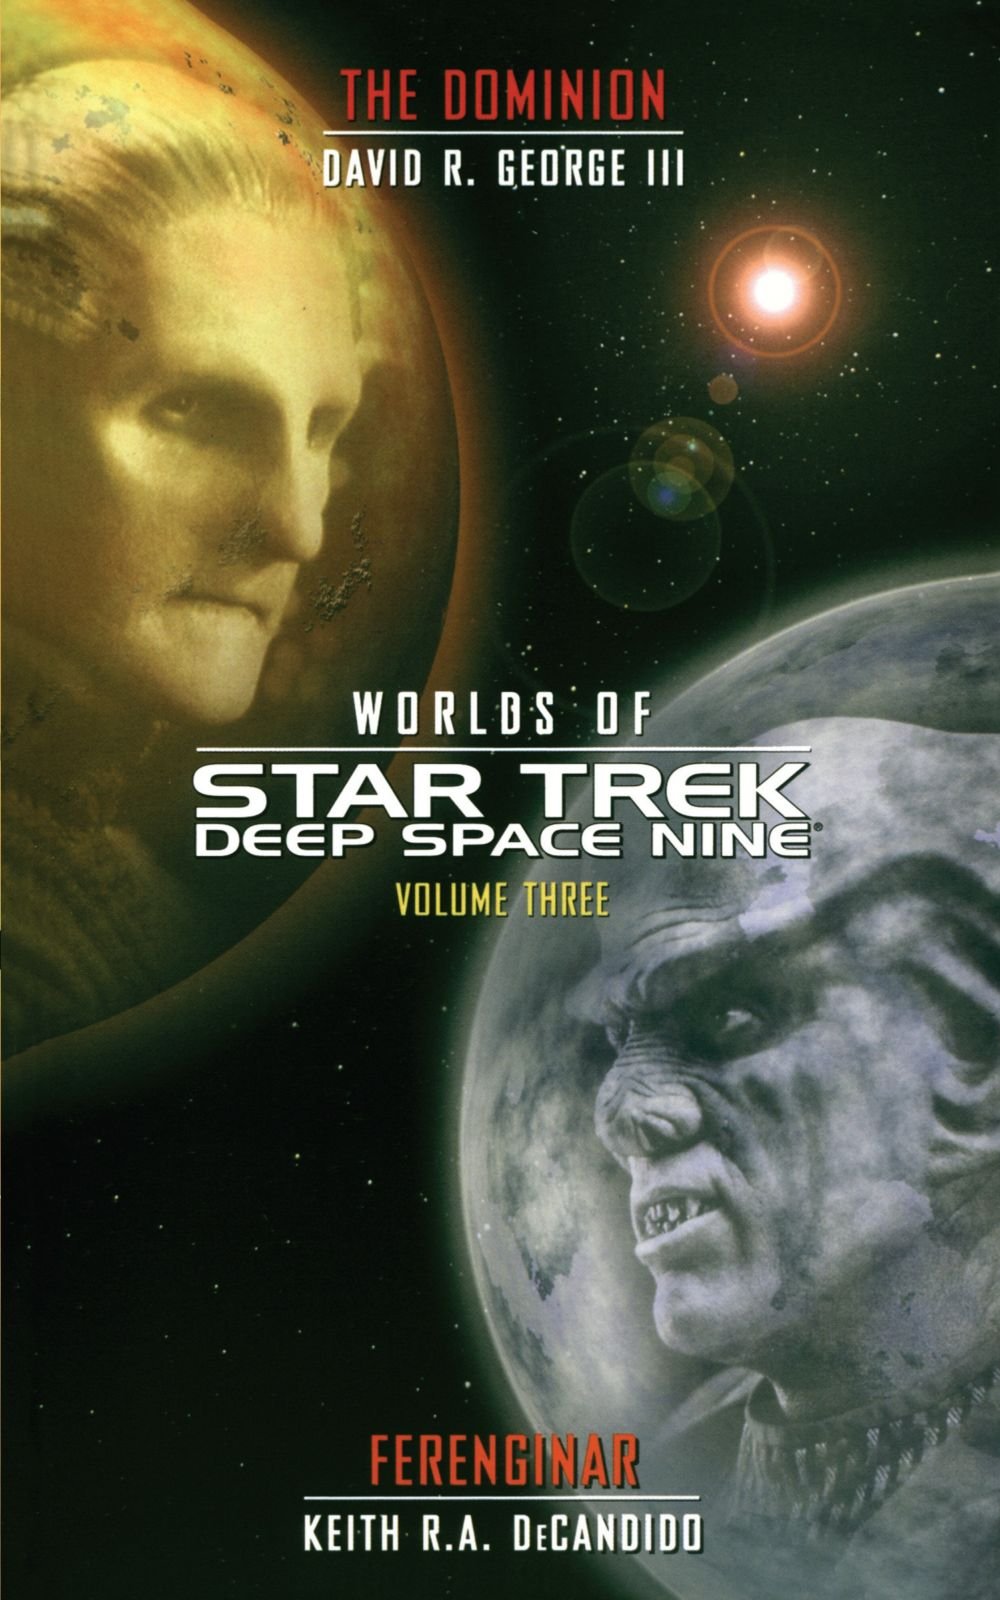 “Worlds Of Star Trek: Deep Space Nine: Volume 3: The Dominion and Ferenginar” Review by Tor.com